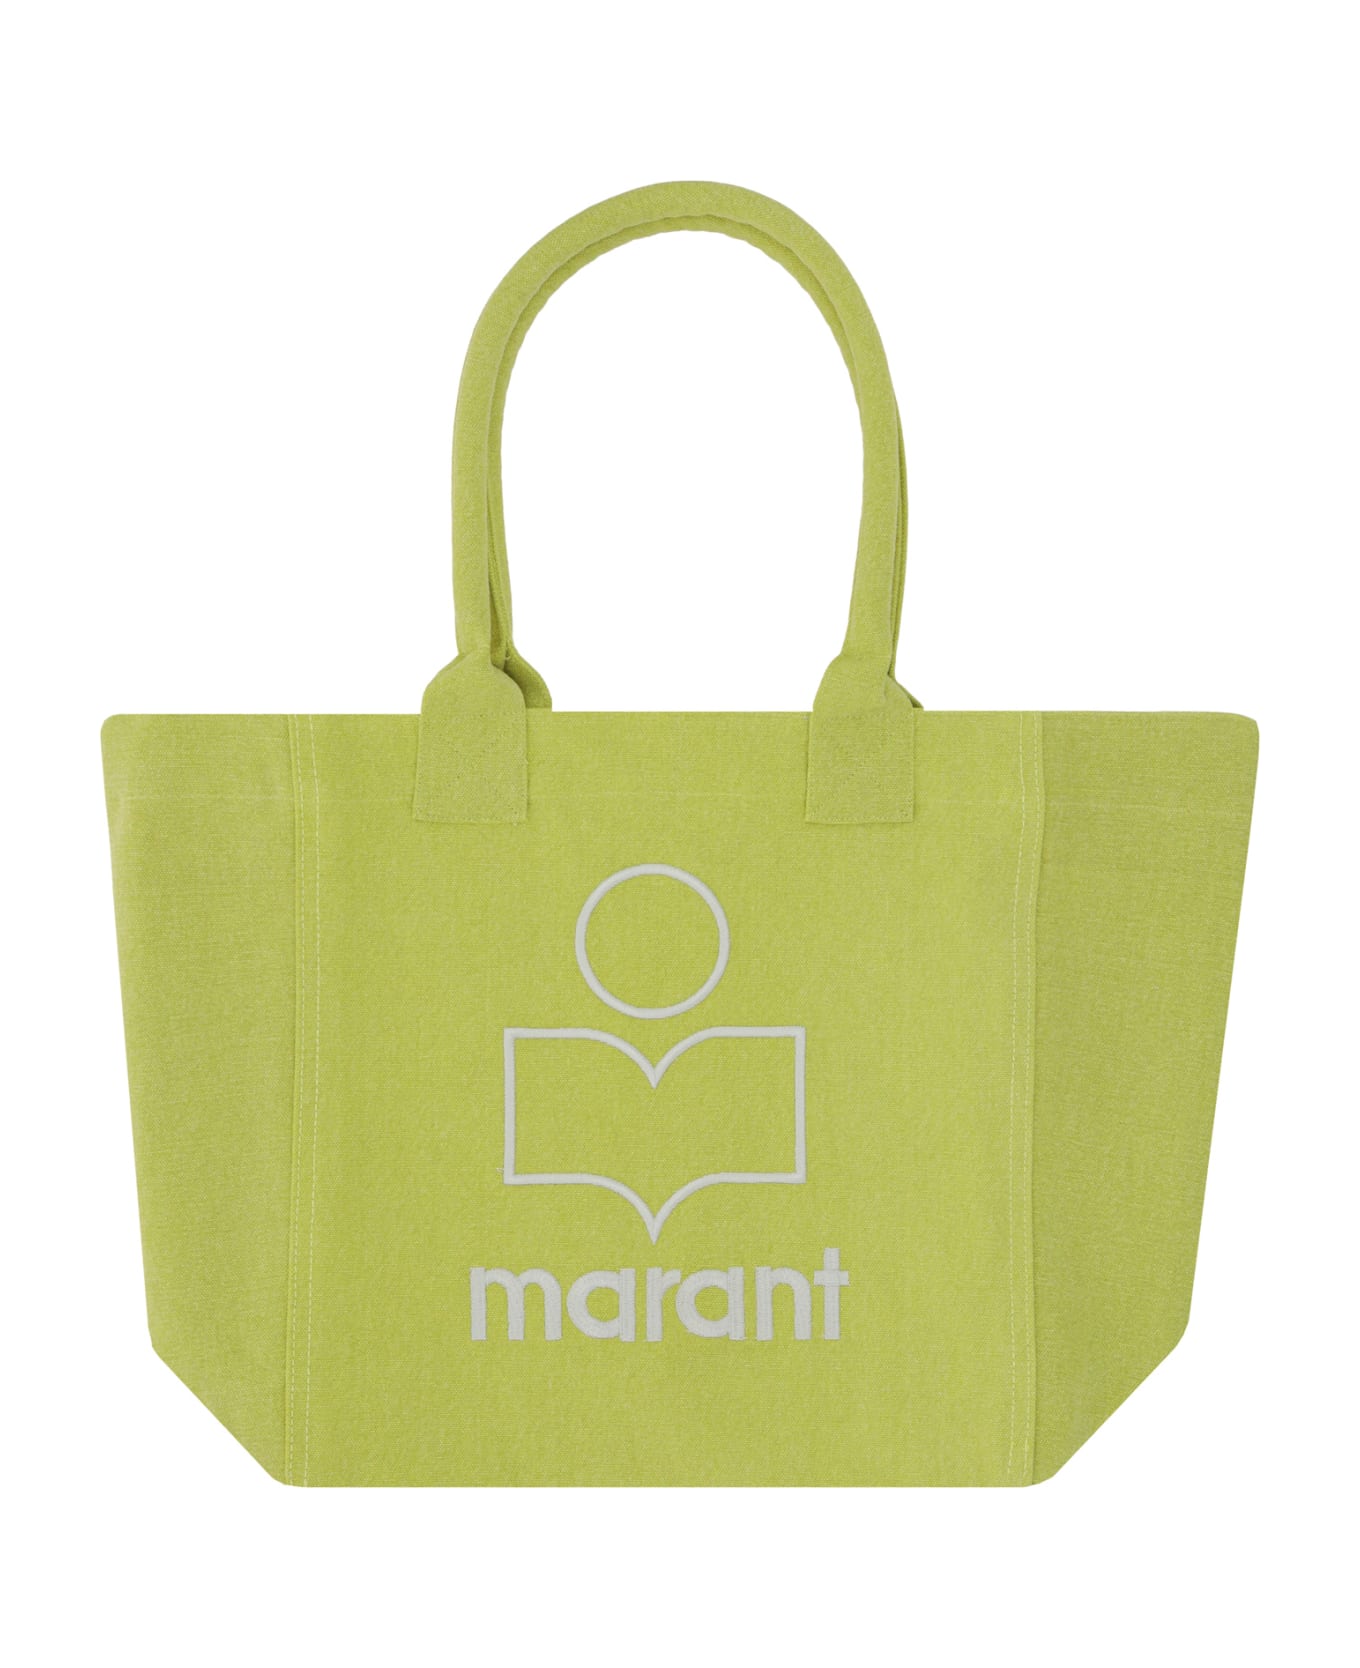 Isabel Marant Yenky Logo Embroidered Tote Bag - Sunlight